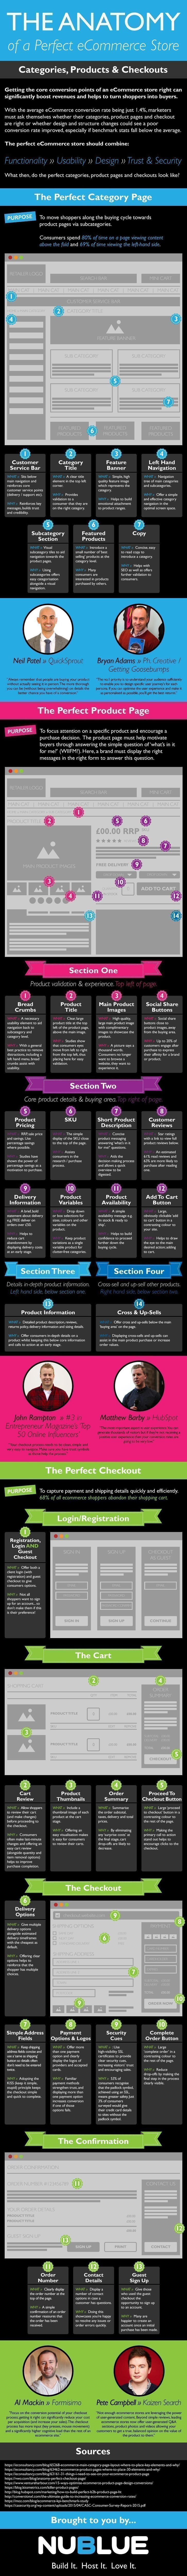 The Anatomy of a Perfect eCommerce Store [Infographic]